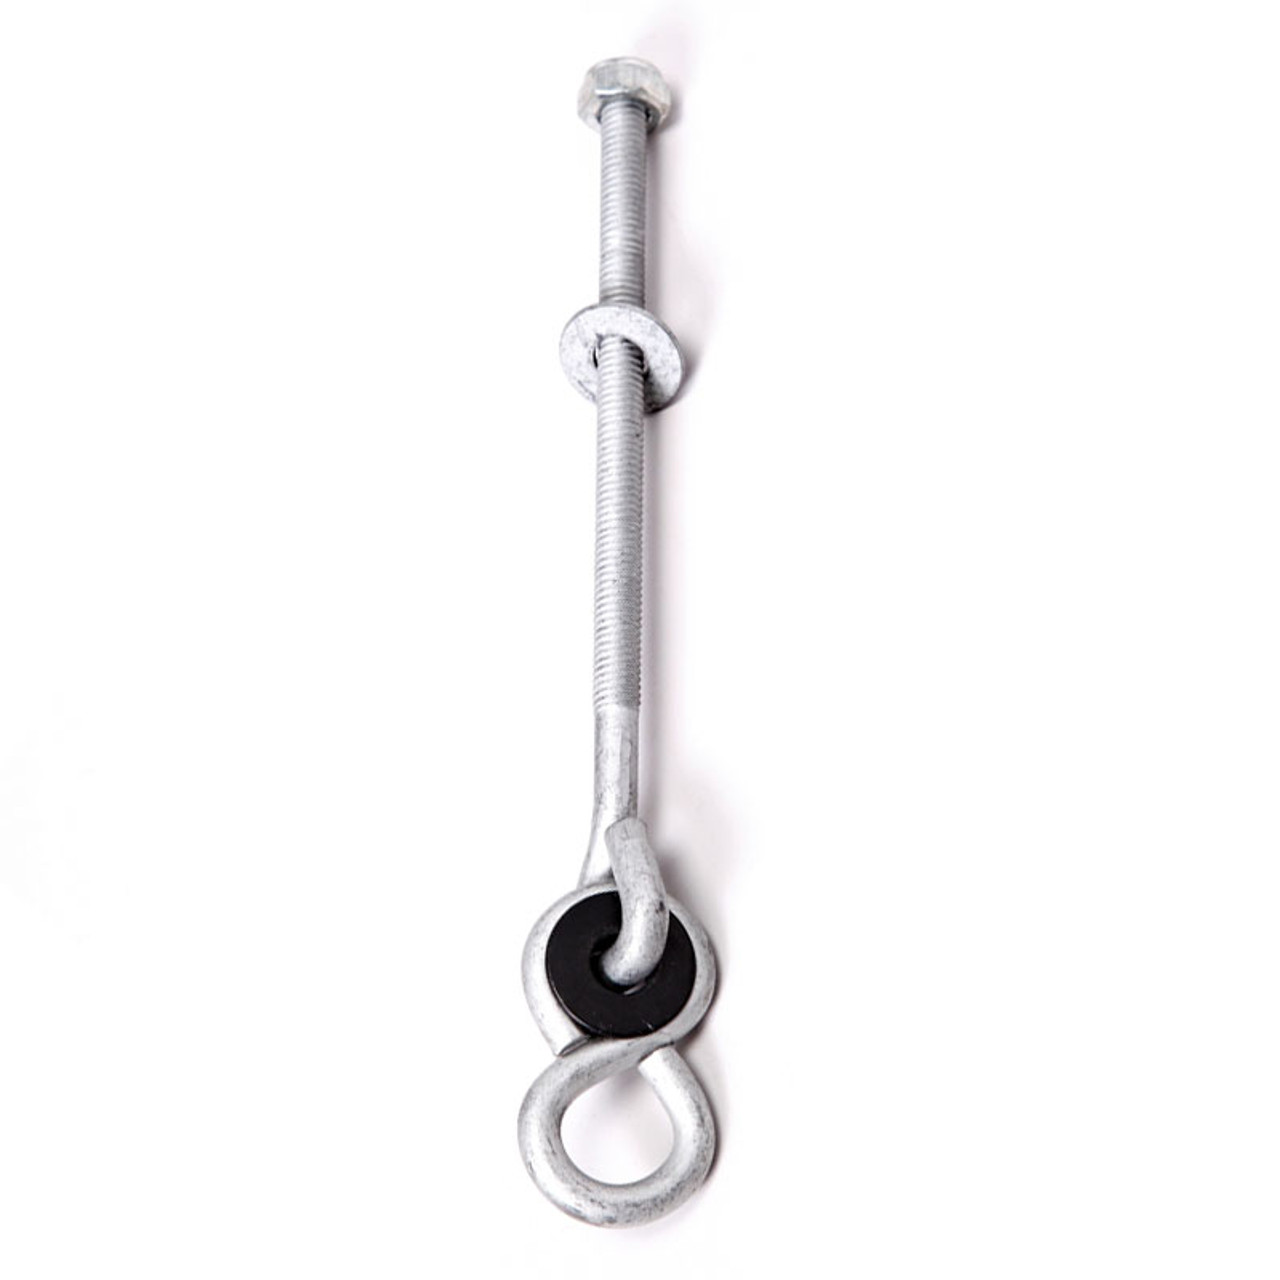 Carabineer Style Swivel Snap Hook Hardware | Add Accessories To Your Playset